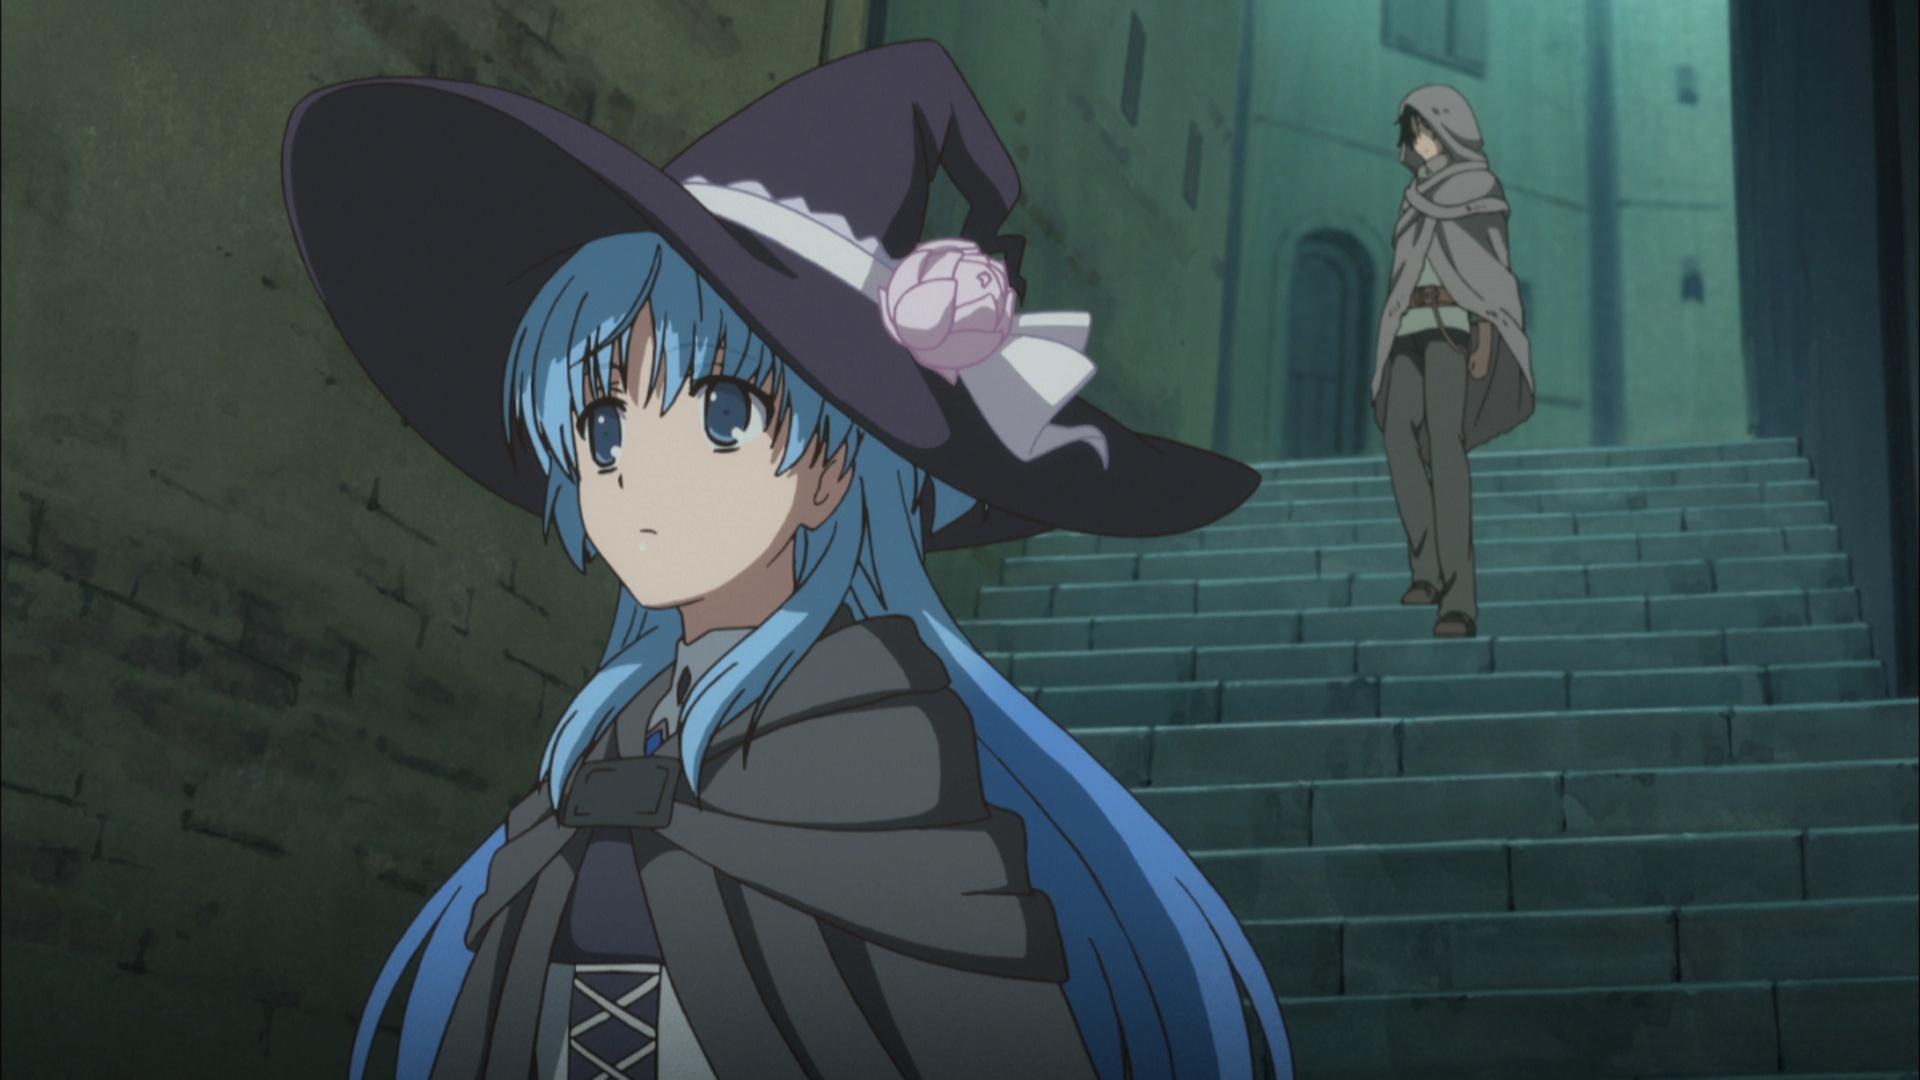 Watch WorldEnd: What are you doing at the end of the world? Are you